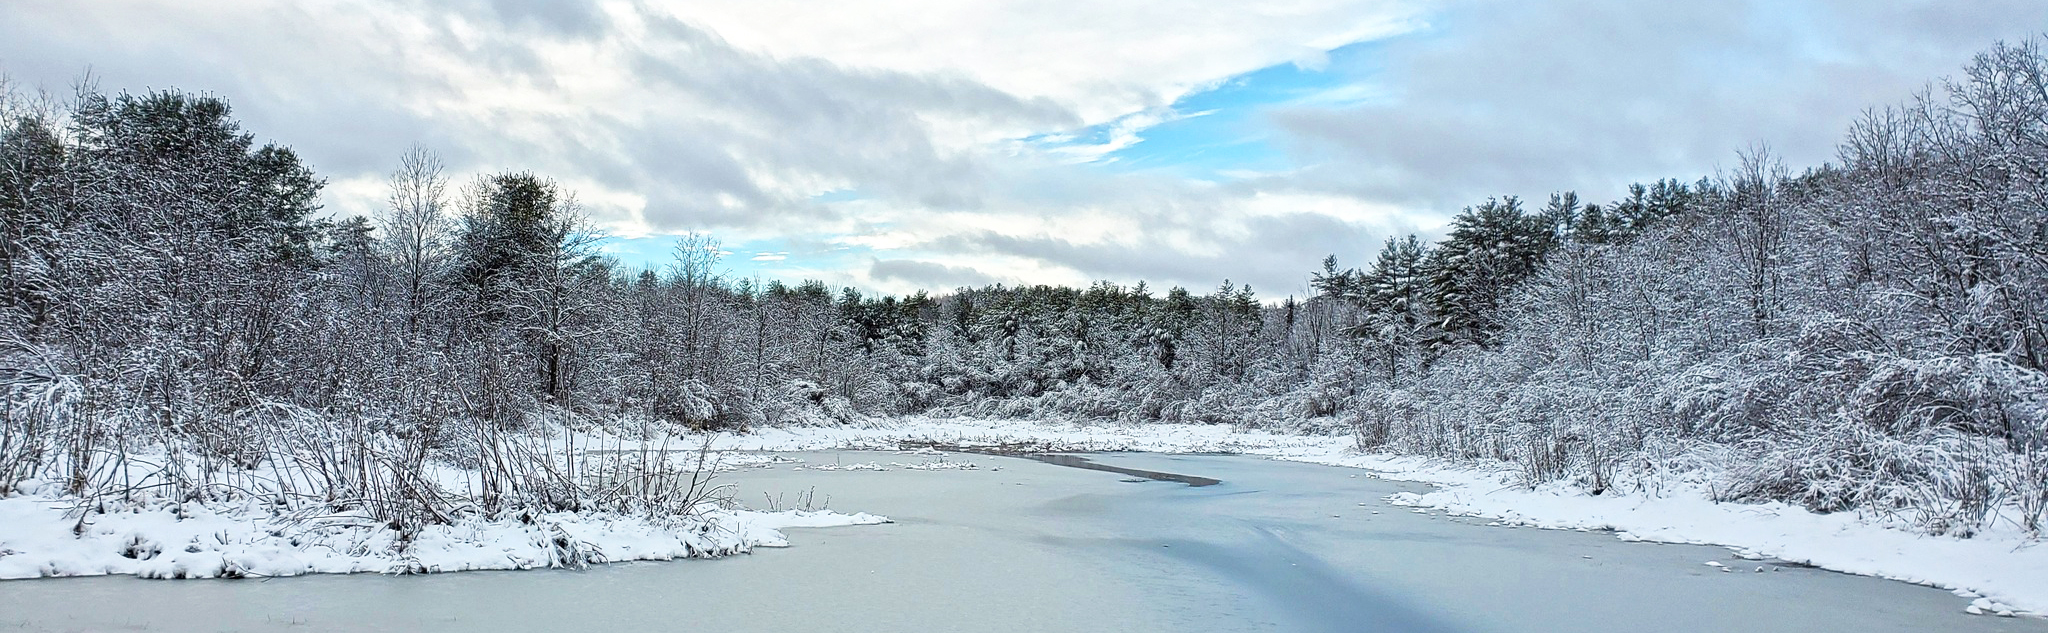 Crescent Lake in the Unity NH covered in ice with snow-covered trees pine all around it.